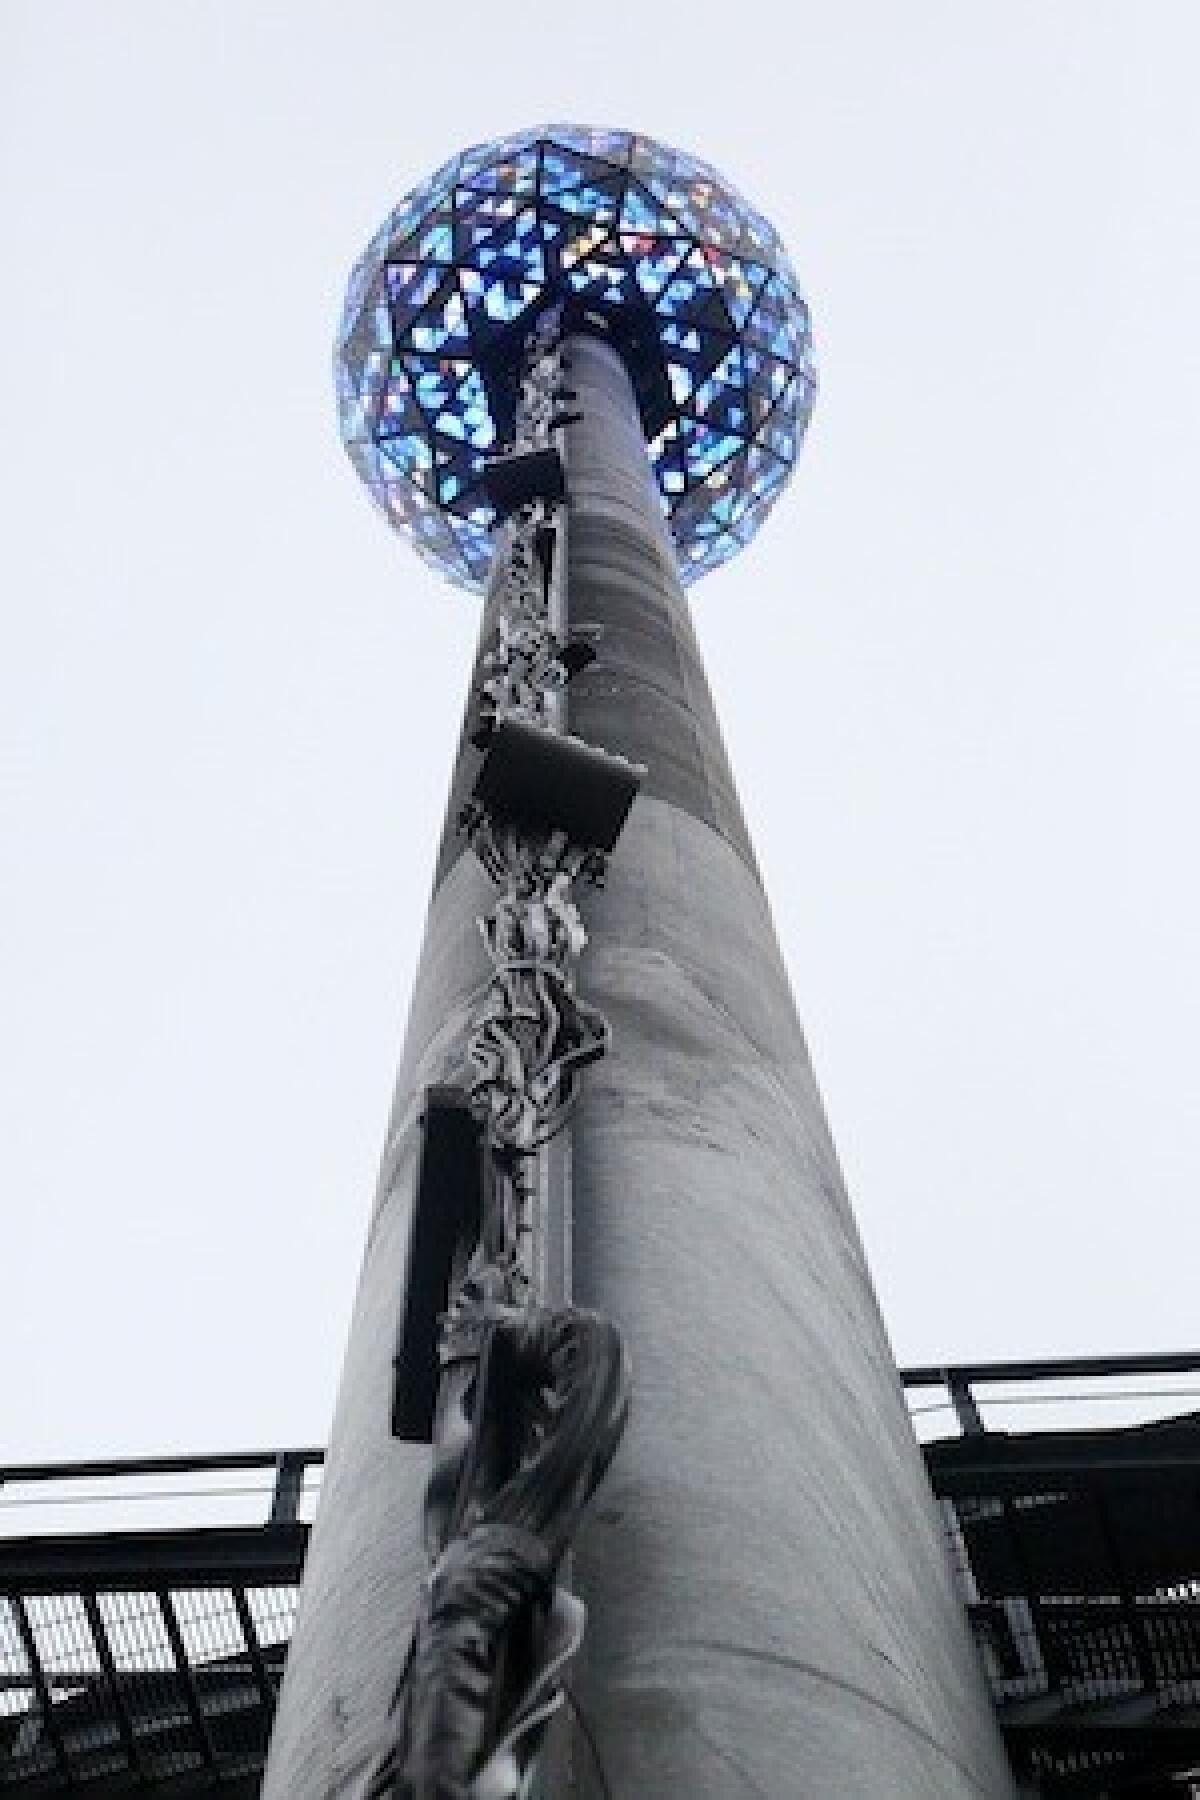 The New Year's Eve ball featuring 2,688 pieces of Waterford crystal is tested Monday at Times Square.